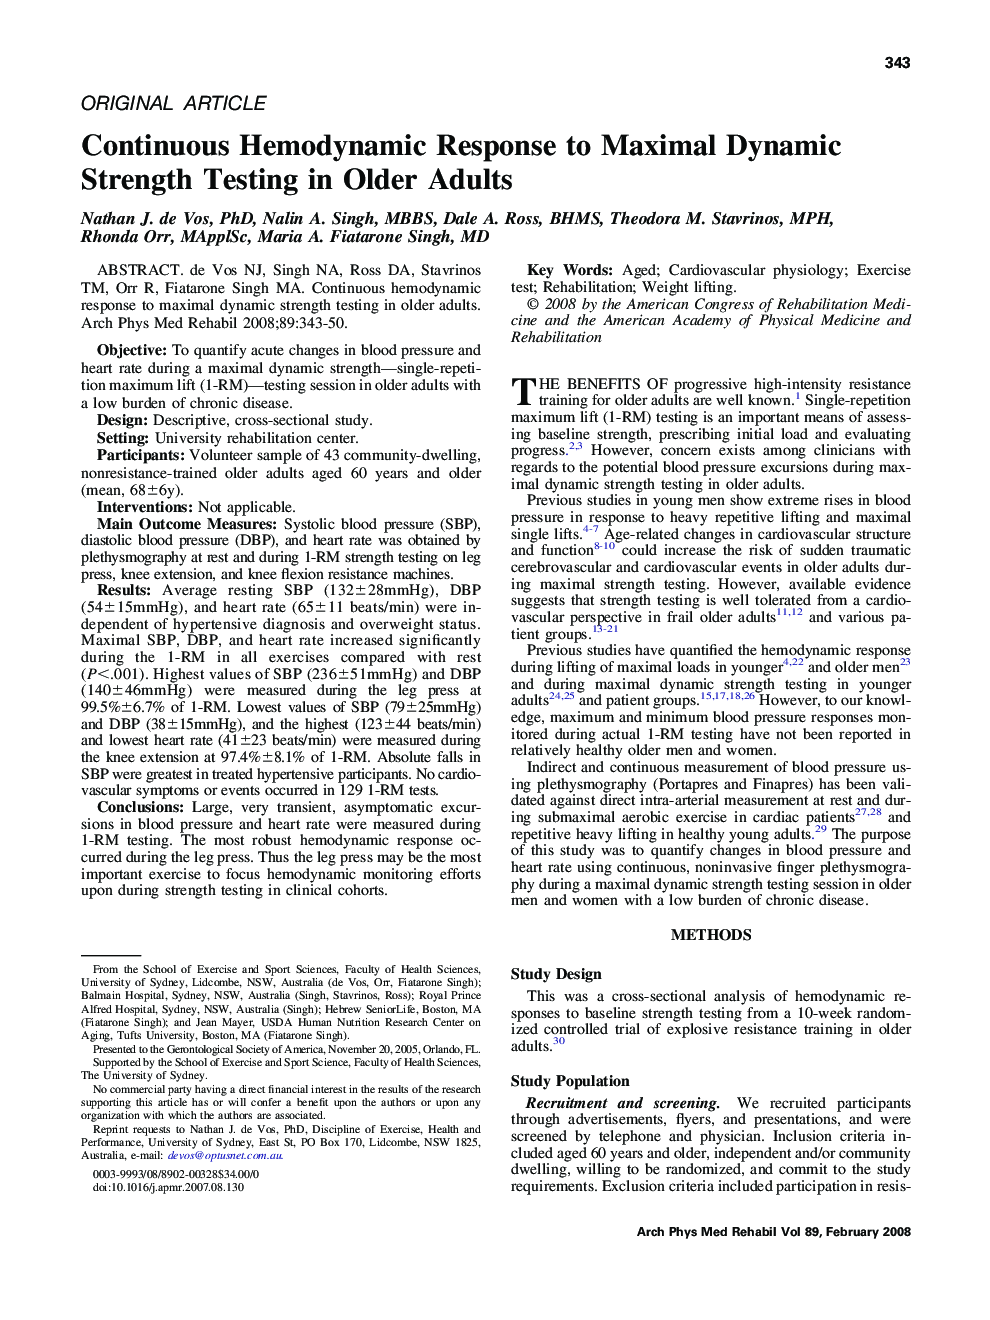 Continuous Hemodynamic Response to Maximal Dynamic Strength Testing in Older Adults